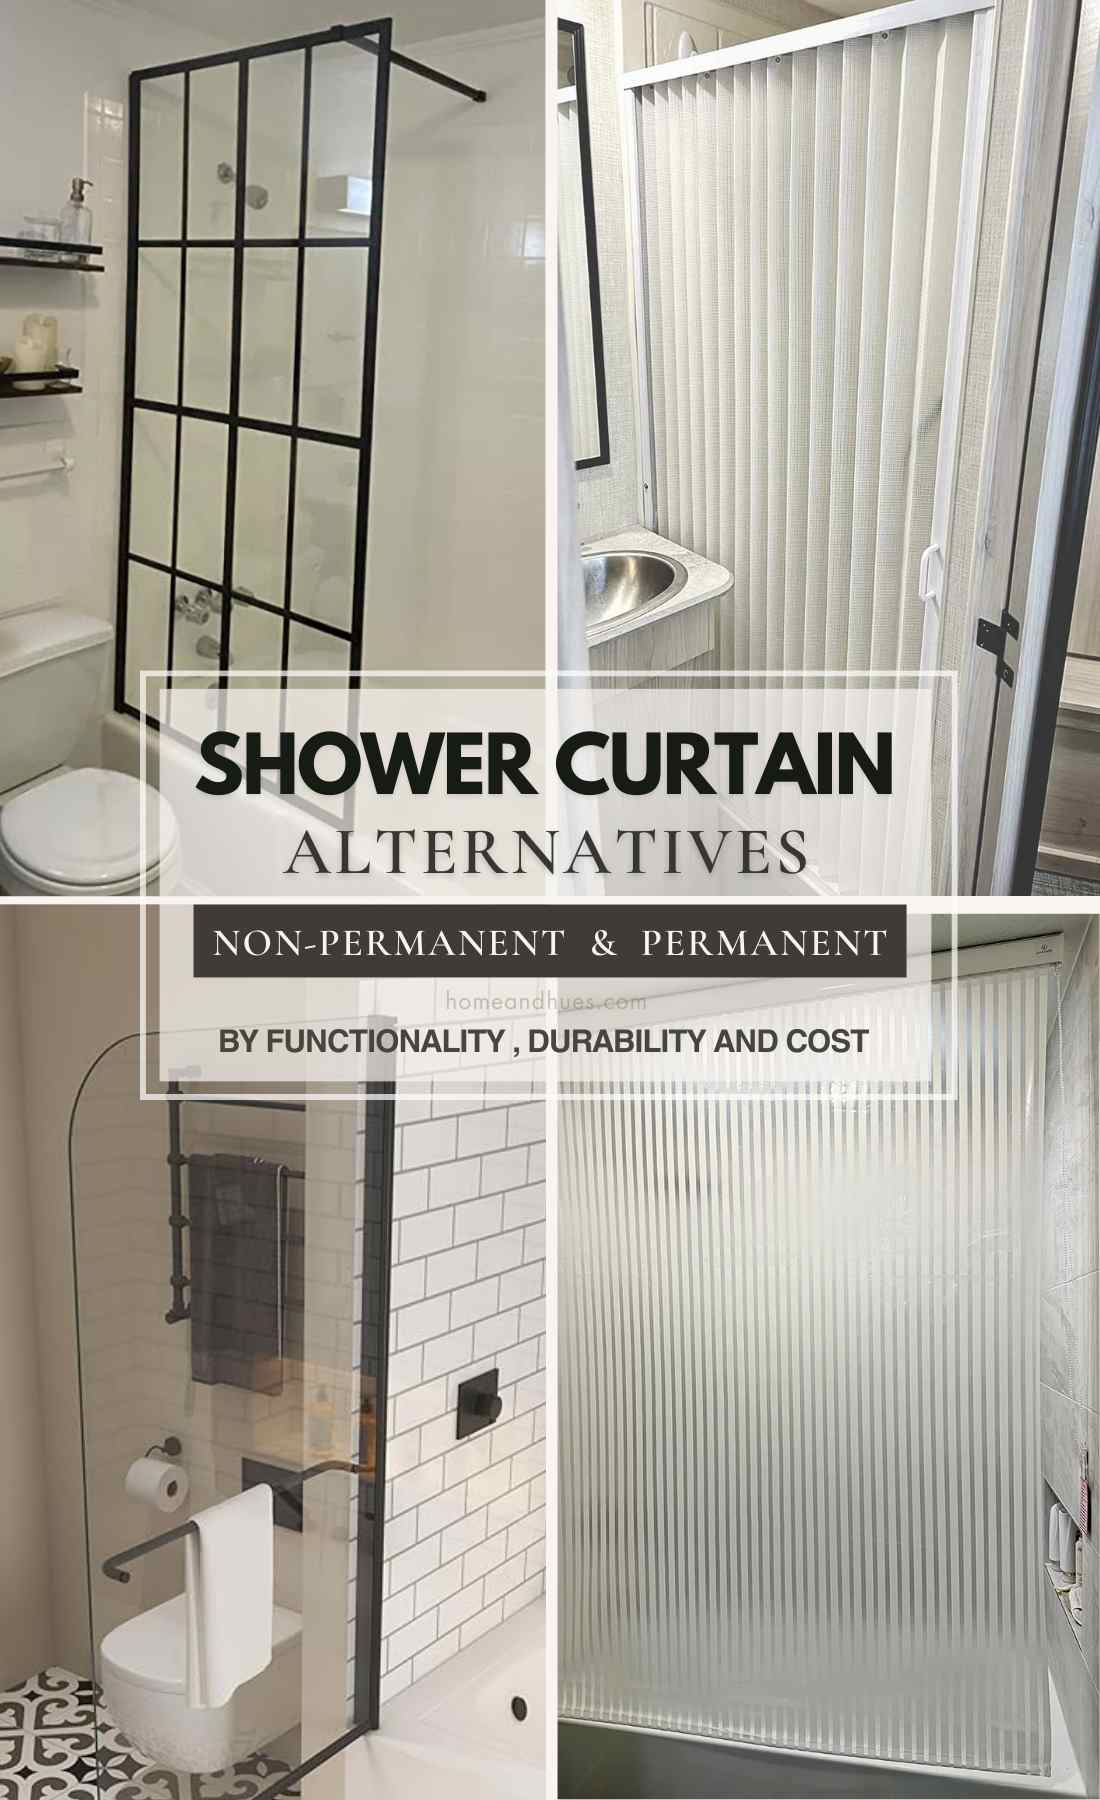 Transform your bathroom with these practical shower curtain alternative ideas!  Discover how to blend style, functionality, and DIY creativity to elevate your bathroom design. Say goodbye to plain curtains that stick to your body and hello to chic, practical shower curtain alternatives that provides more bathroom hygiene and easy cleaning whether they are less or more permanent.  